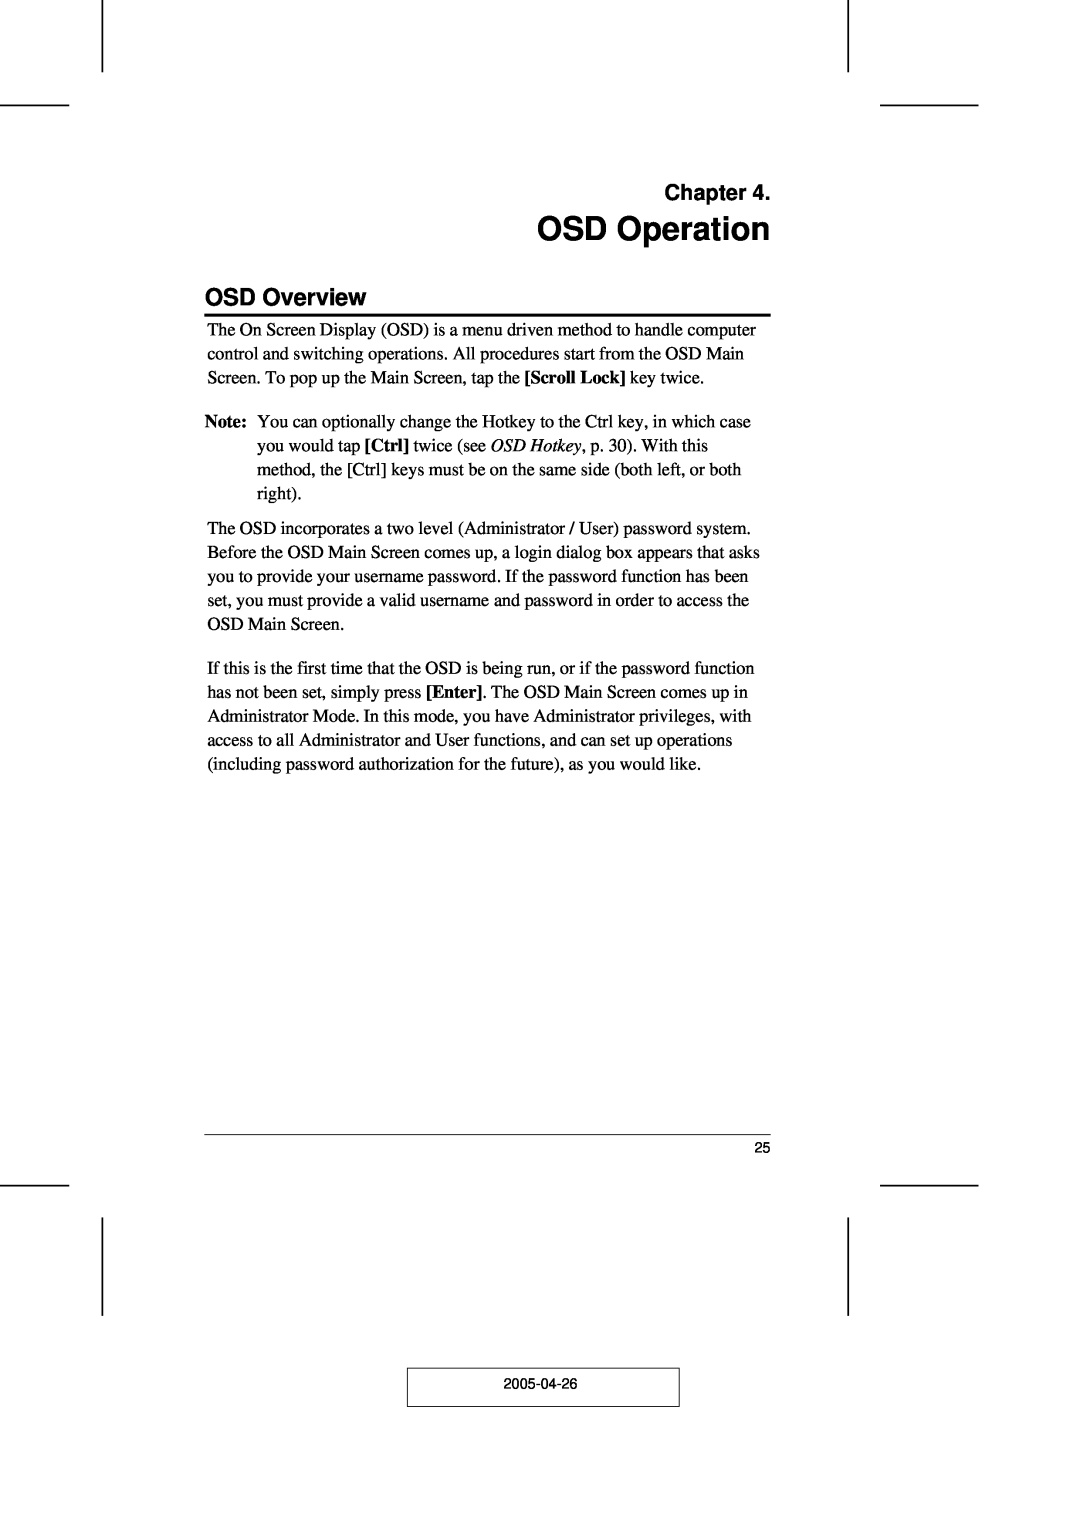 ATEN Technology CL-1216, CL-1208 user manual OSD Operation, OSD Overview, Chapter 